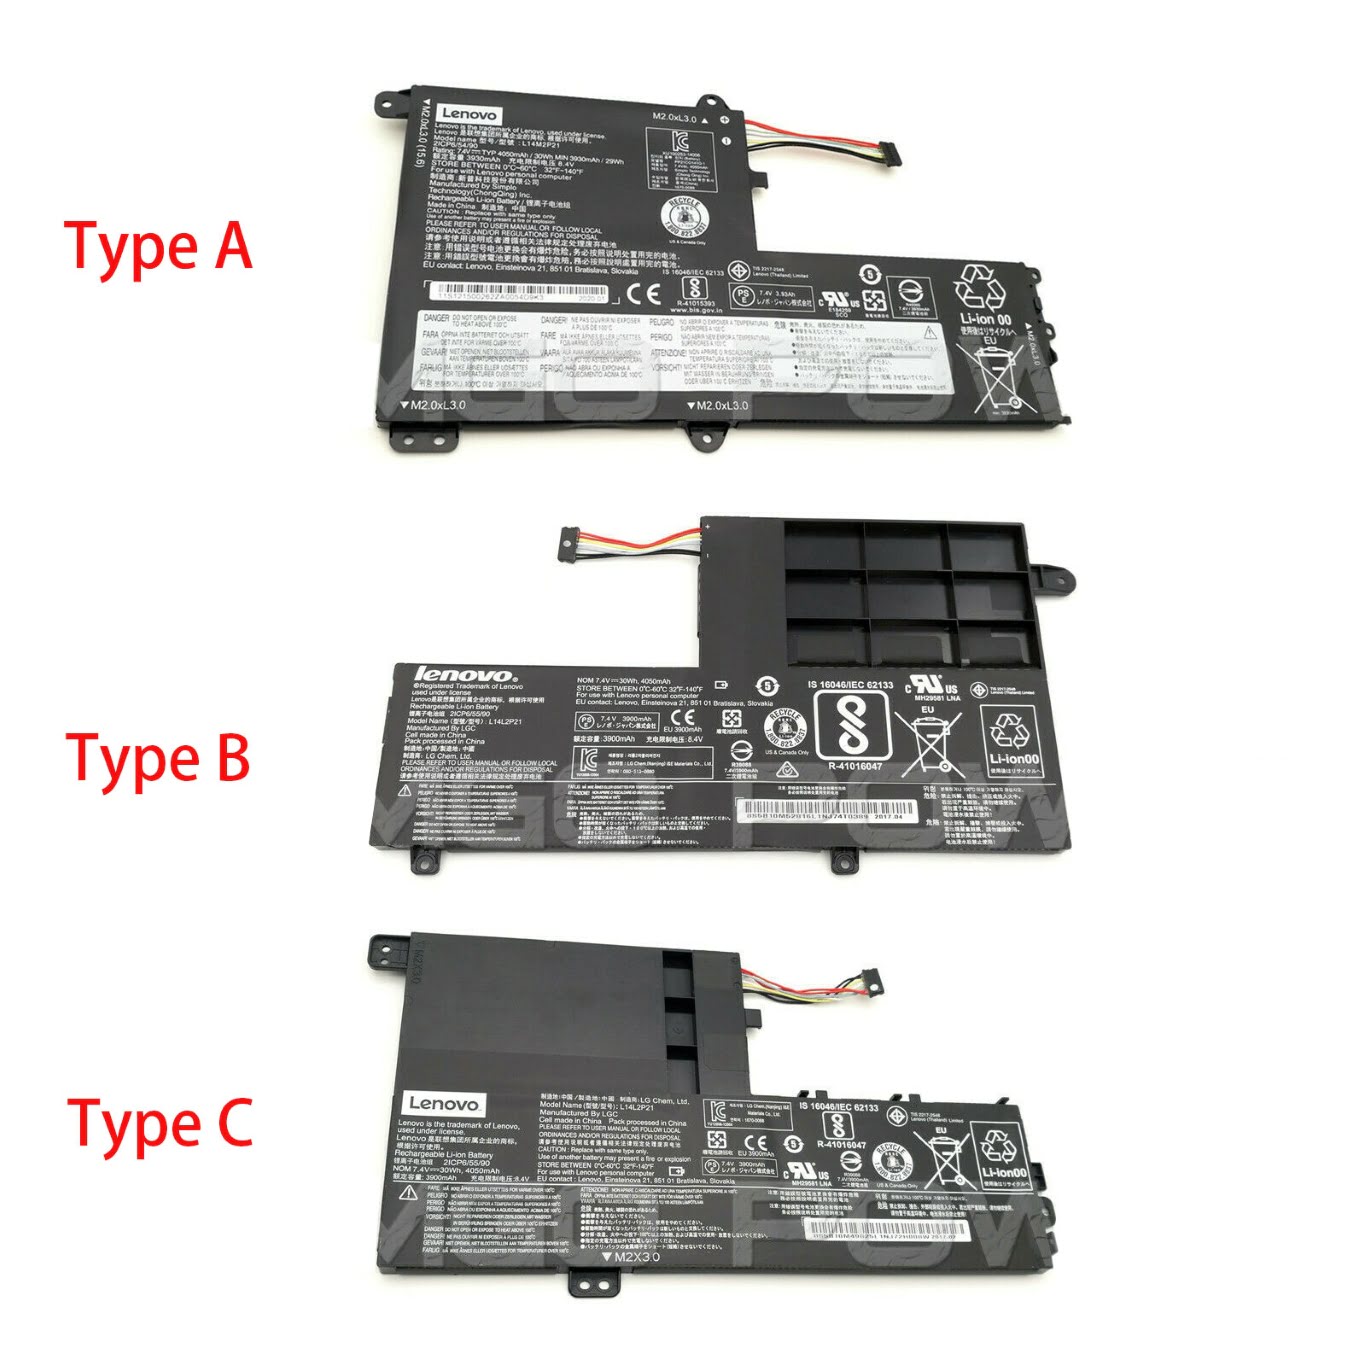 Lenovo 5b10g78610, 5b10g78612 Laptop Battery For Yoga 500-15isk(80r6007sge), Yoga 500-14ihw(80n50069ge) replacement